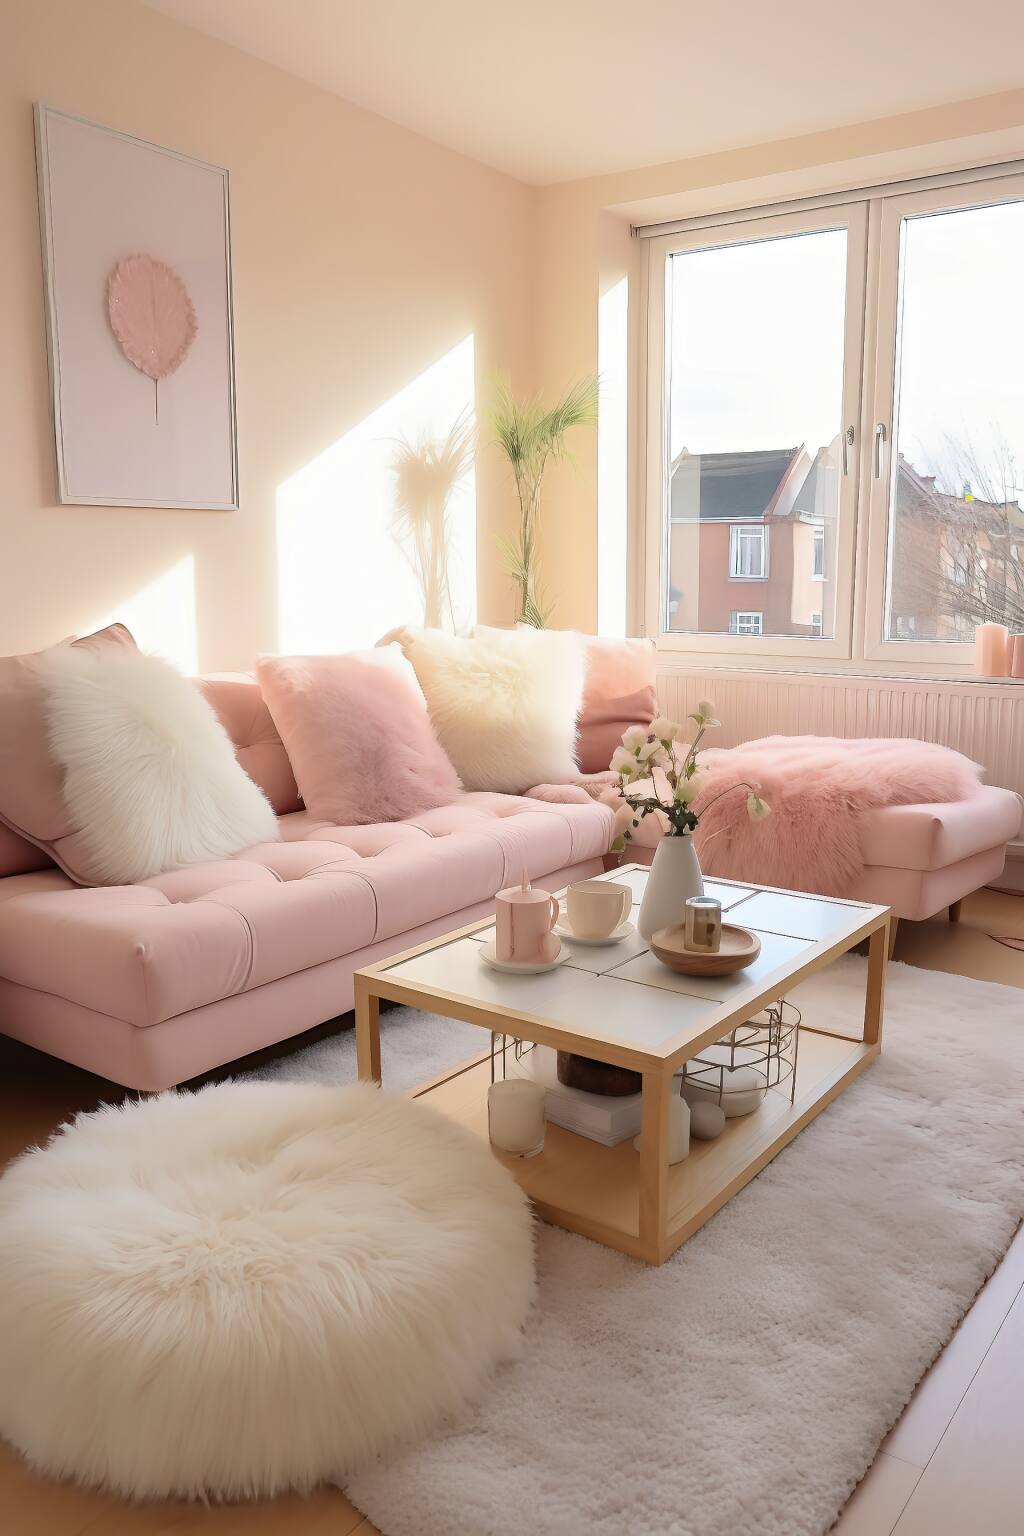 A Cozy Modern Romantic Living Room With Pastel Pink Sofas, White Faux Fur Pillows, A White Fluffy Rug, And A Wooden Coffee Table In A Sunlit Space.